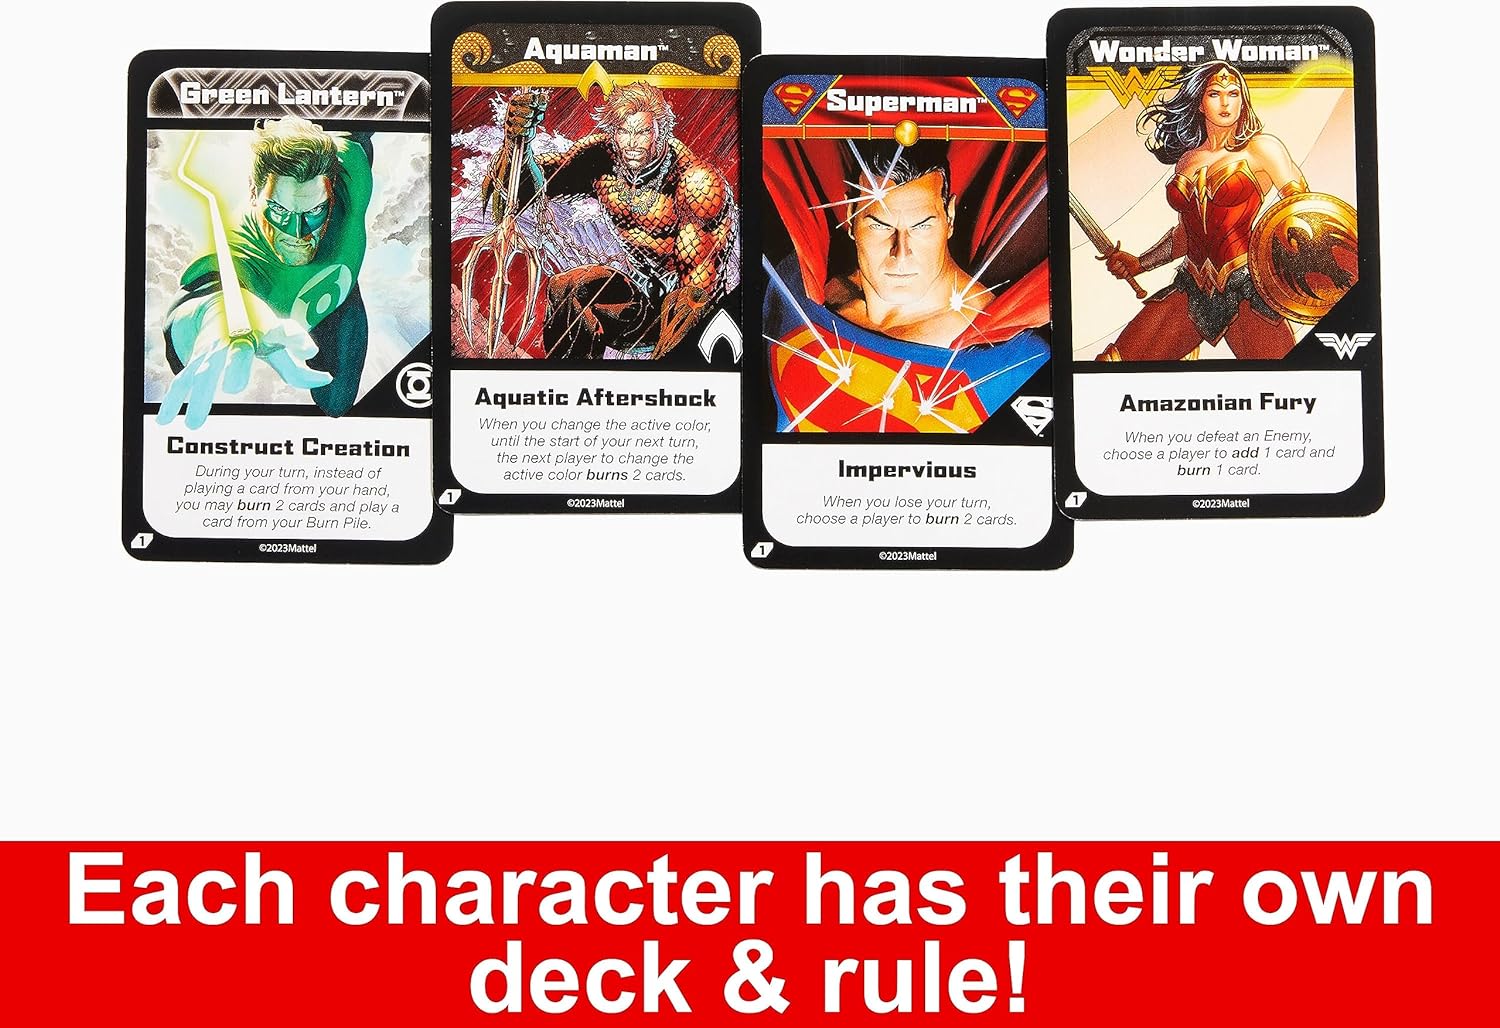 UNO: Ultimate DC Edition - Bards & Cards